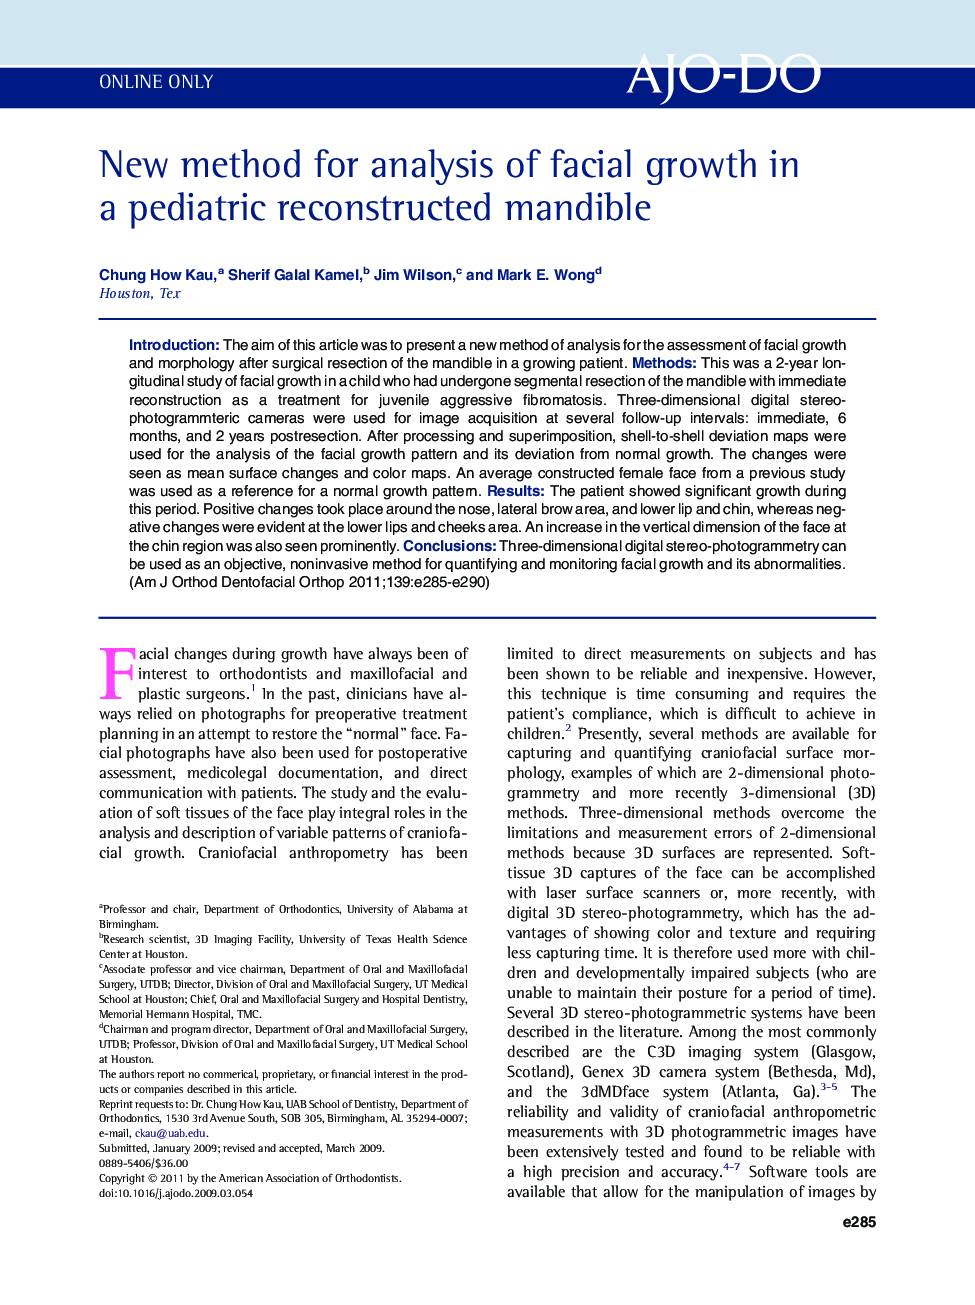 New method for analysis of facial growth in a pediatric reconstructed mandible 